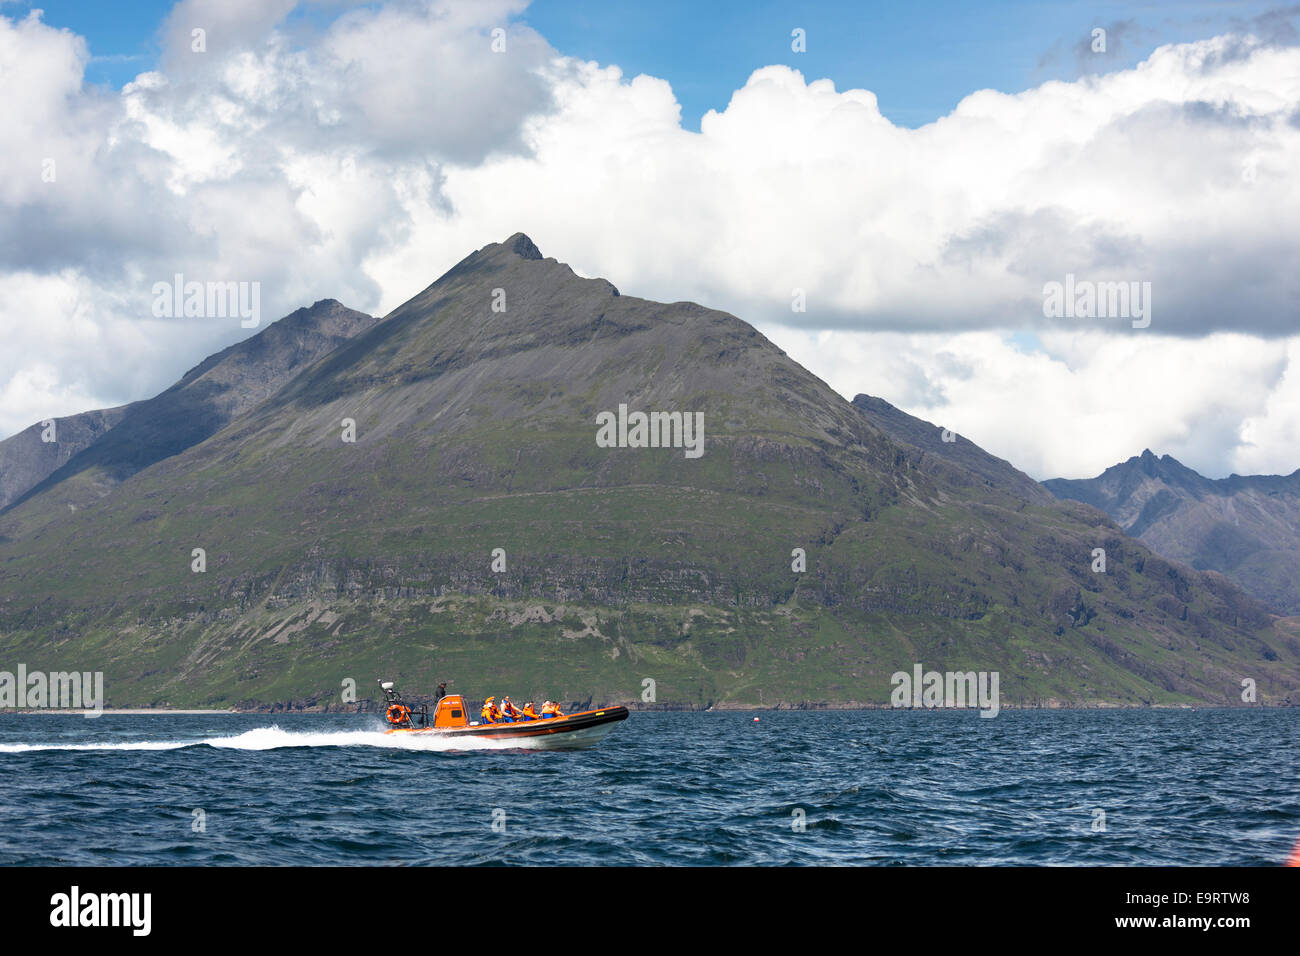 Rigid inflatable tourist sealwatching boat trip, with The Cuillins mountains behind, on visit to Isle of Canna part of the Inner Stock Photo